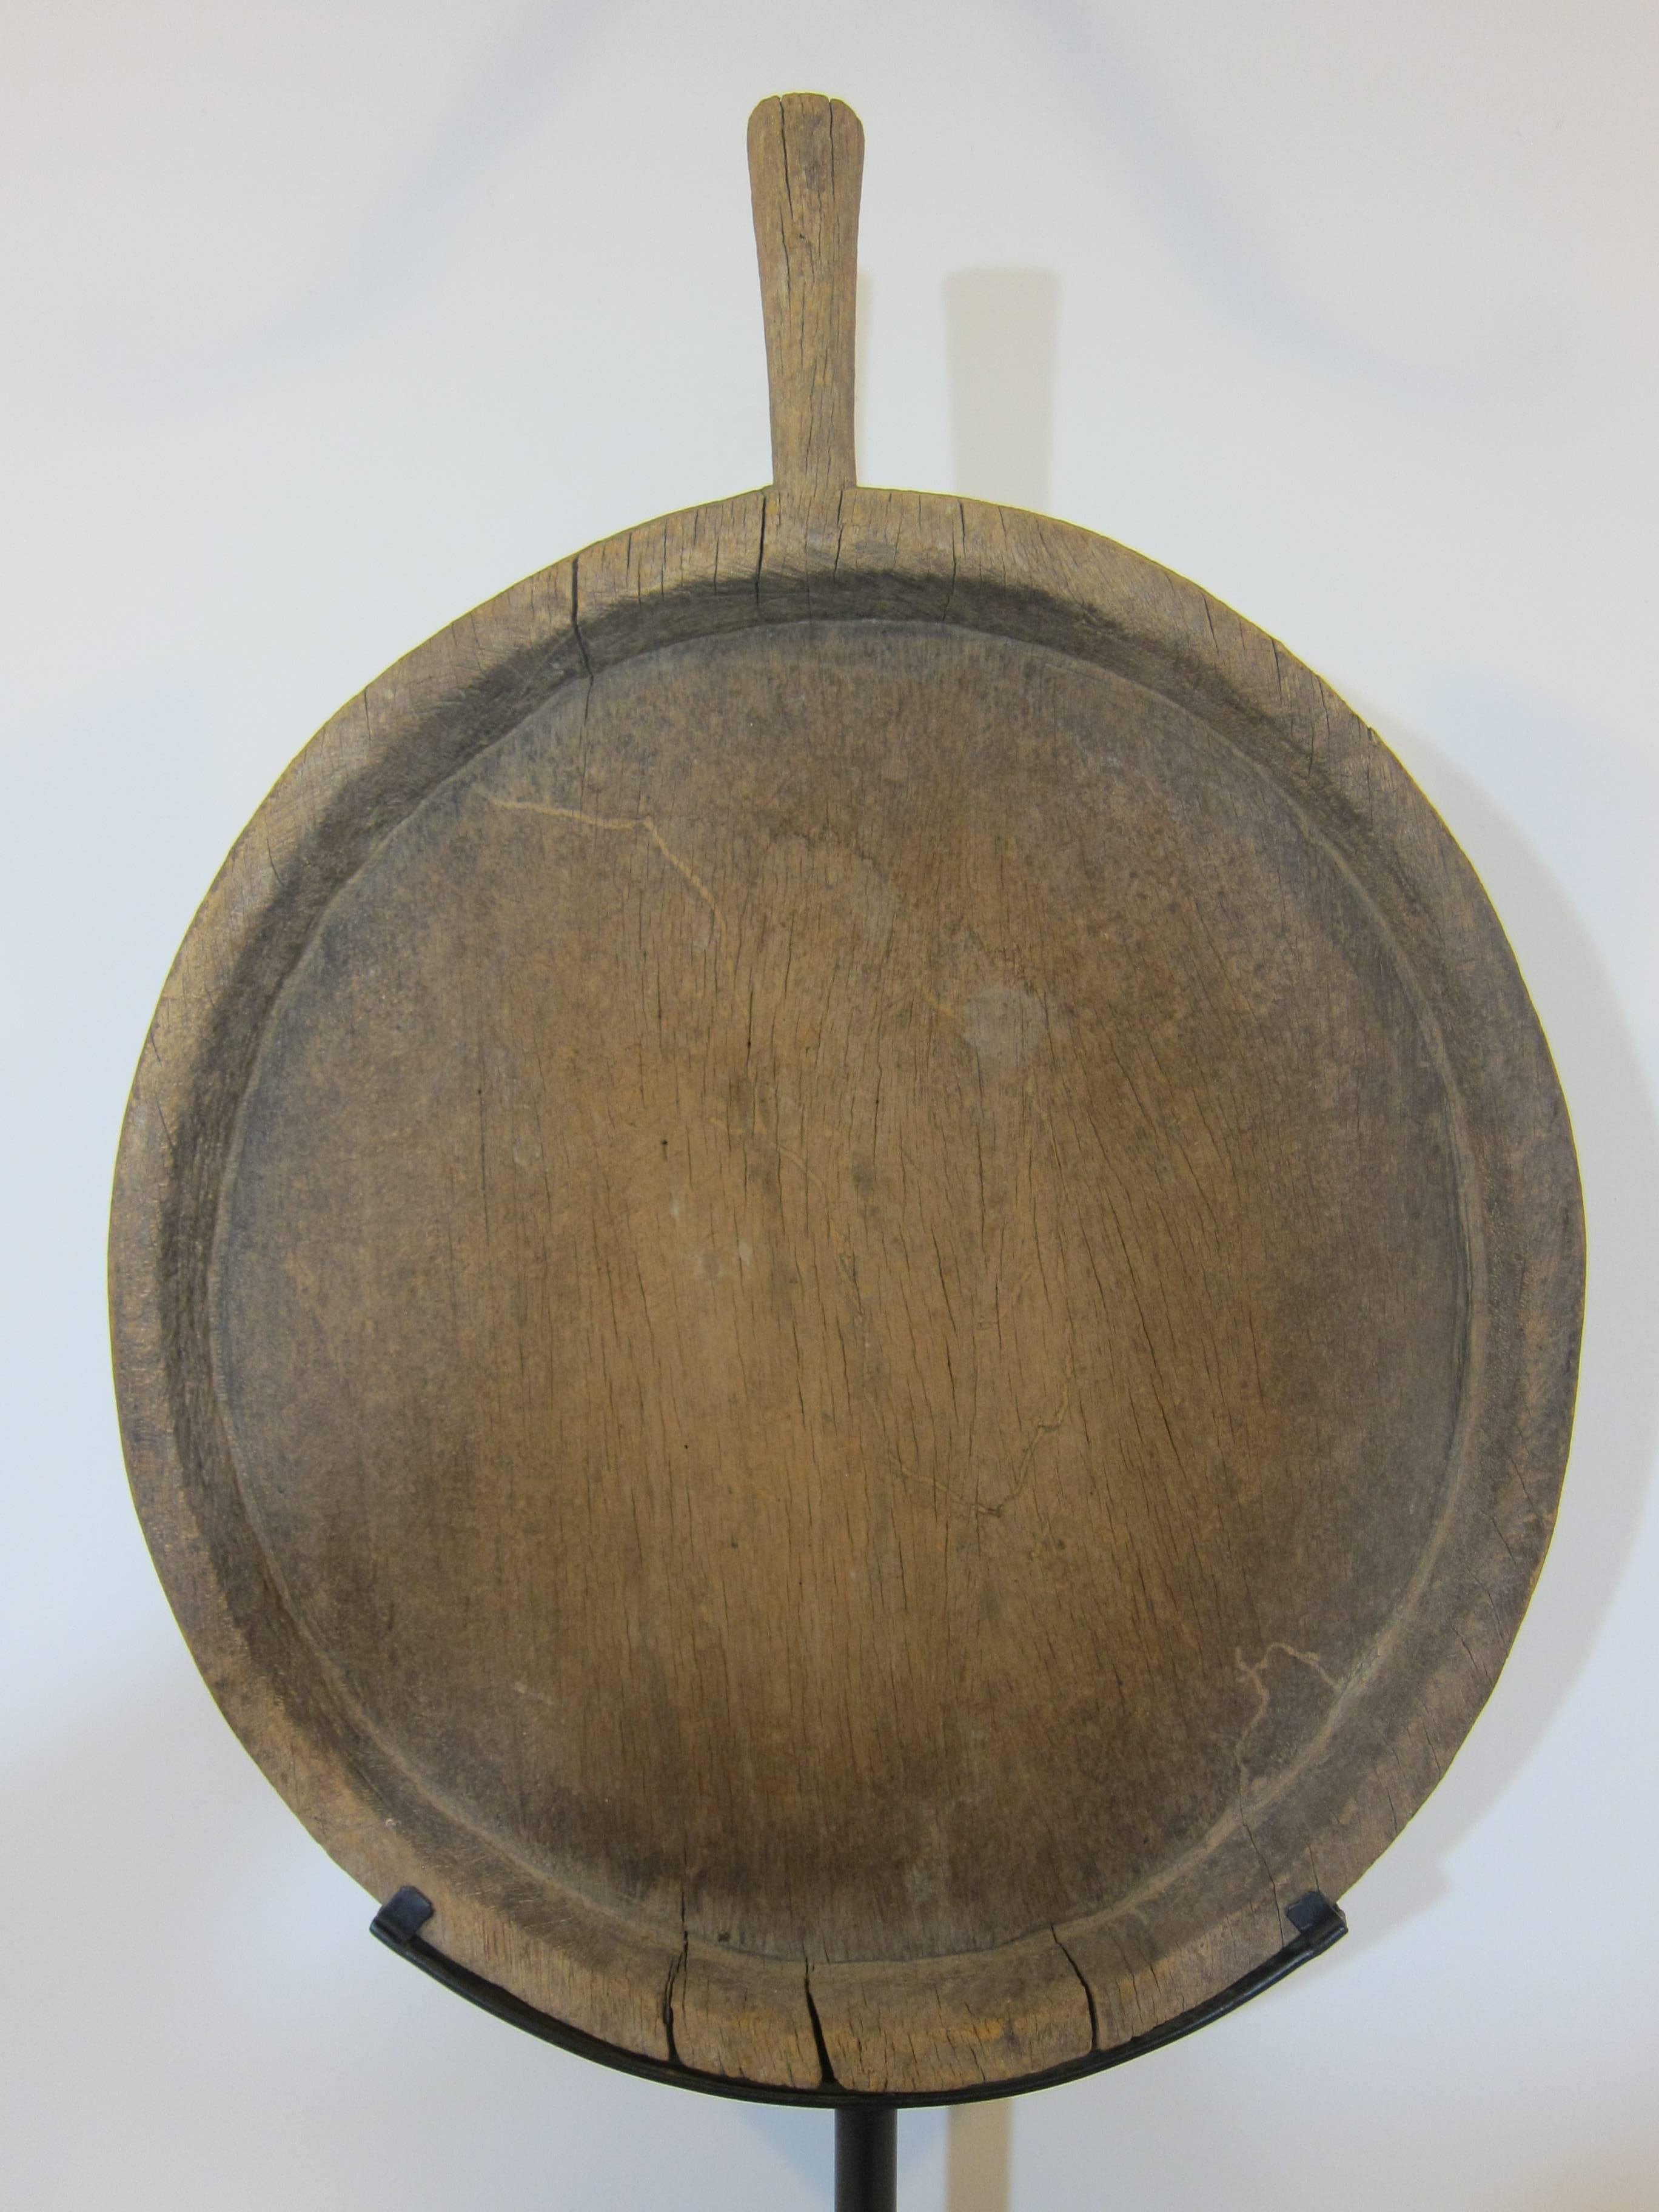 19th century hard wood grain sifter on stand. A monumental solid wood utilitarian hand-carved grain sifter. Used to sift grains and rice for food preparation, circa 1800 or earlier. The wood stand is 18 inches long 5 inches deep. Item stands 46.5